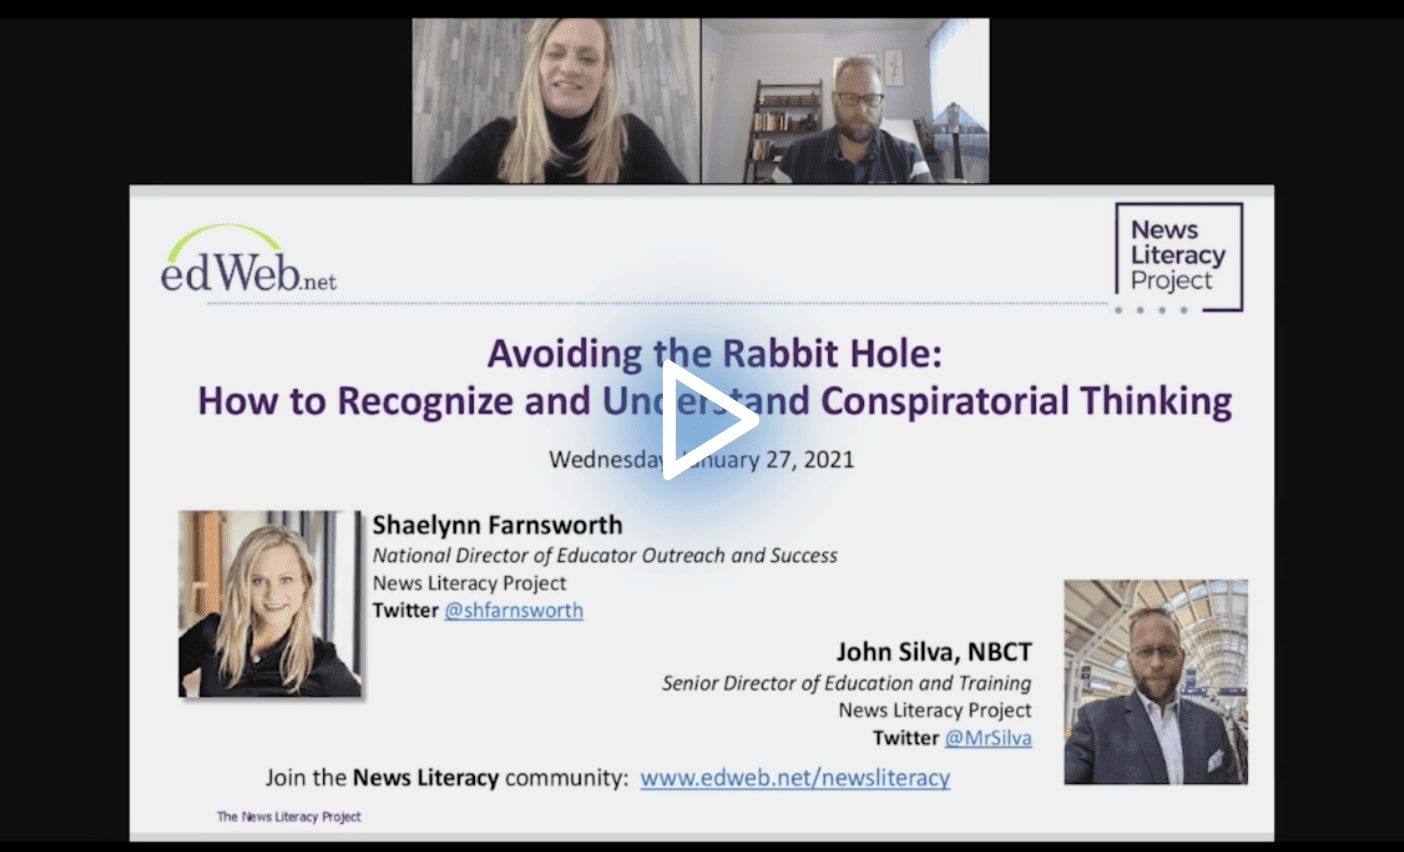 Avoiding the Rabbit Hole: How to Recognize and Understand Conspiratorial Thinking edWebinar recording link